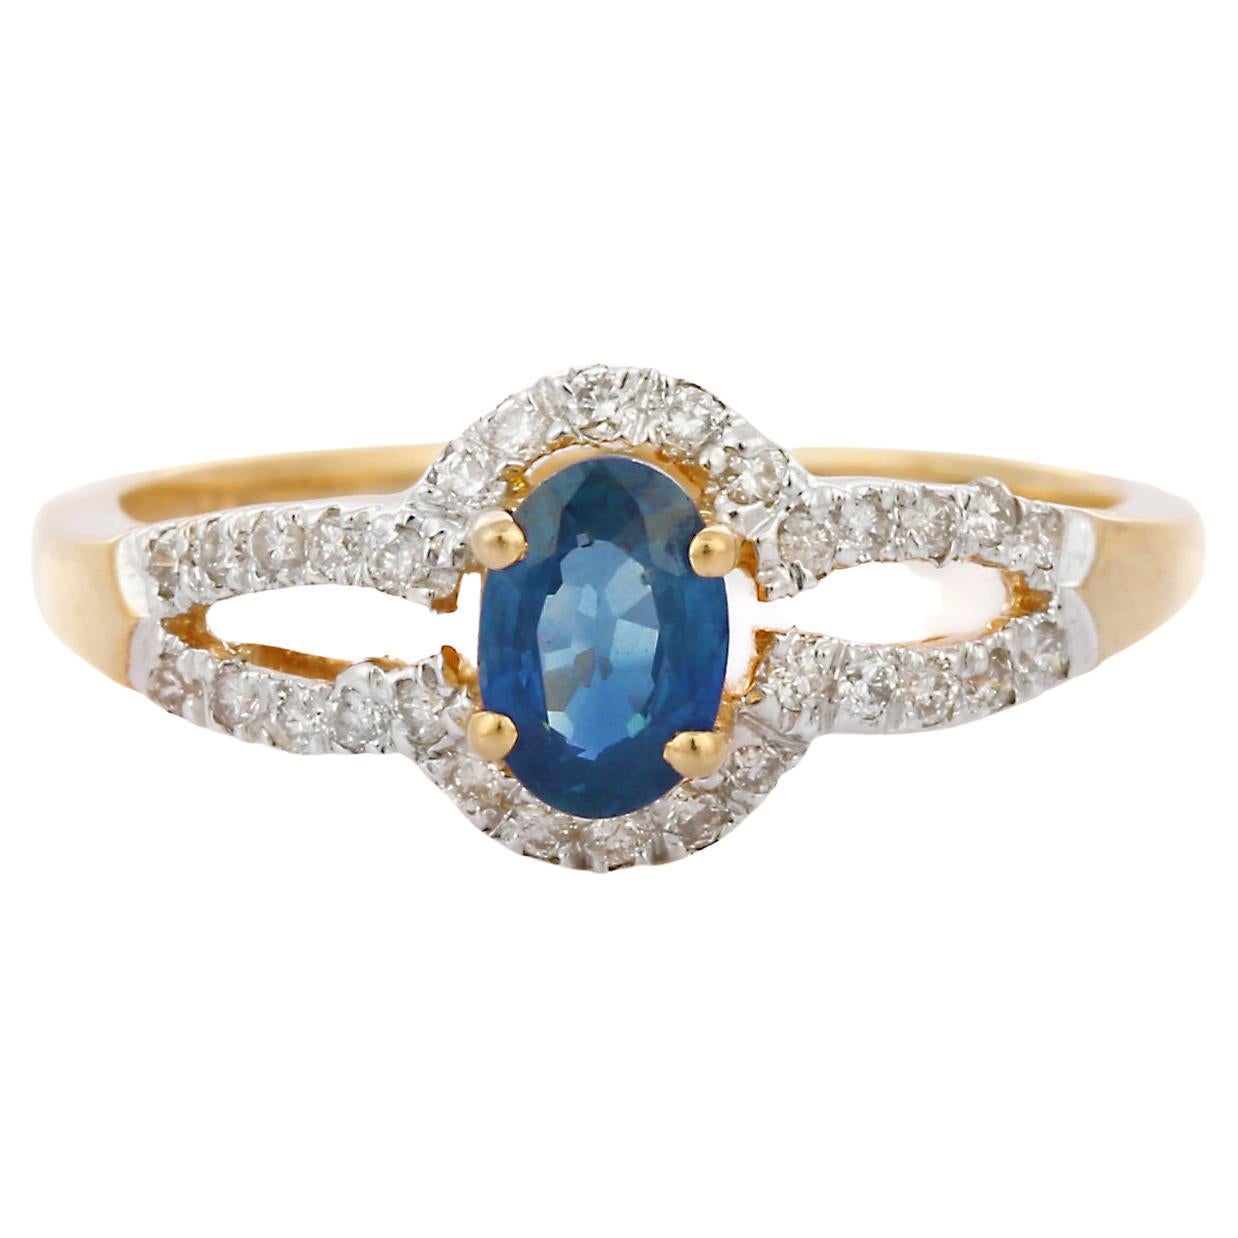 For Sale:  Simple Sapphire Diamond Engagement Ring in 18K Solid Yellow Gold